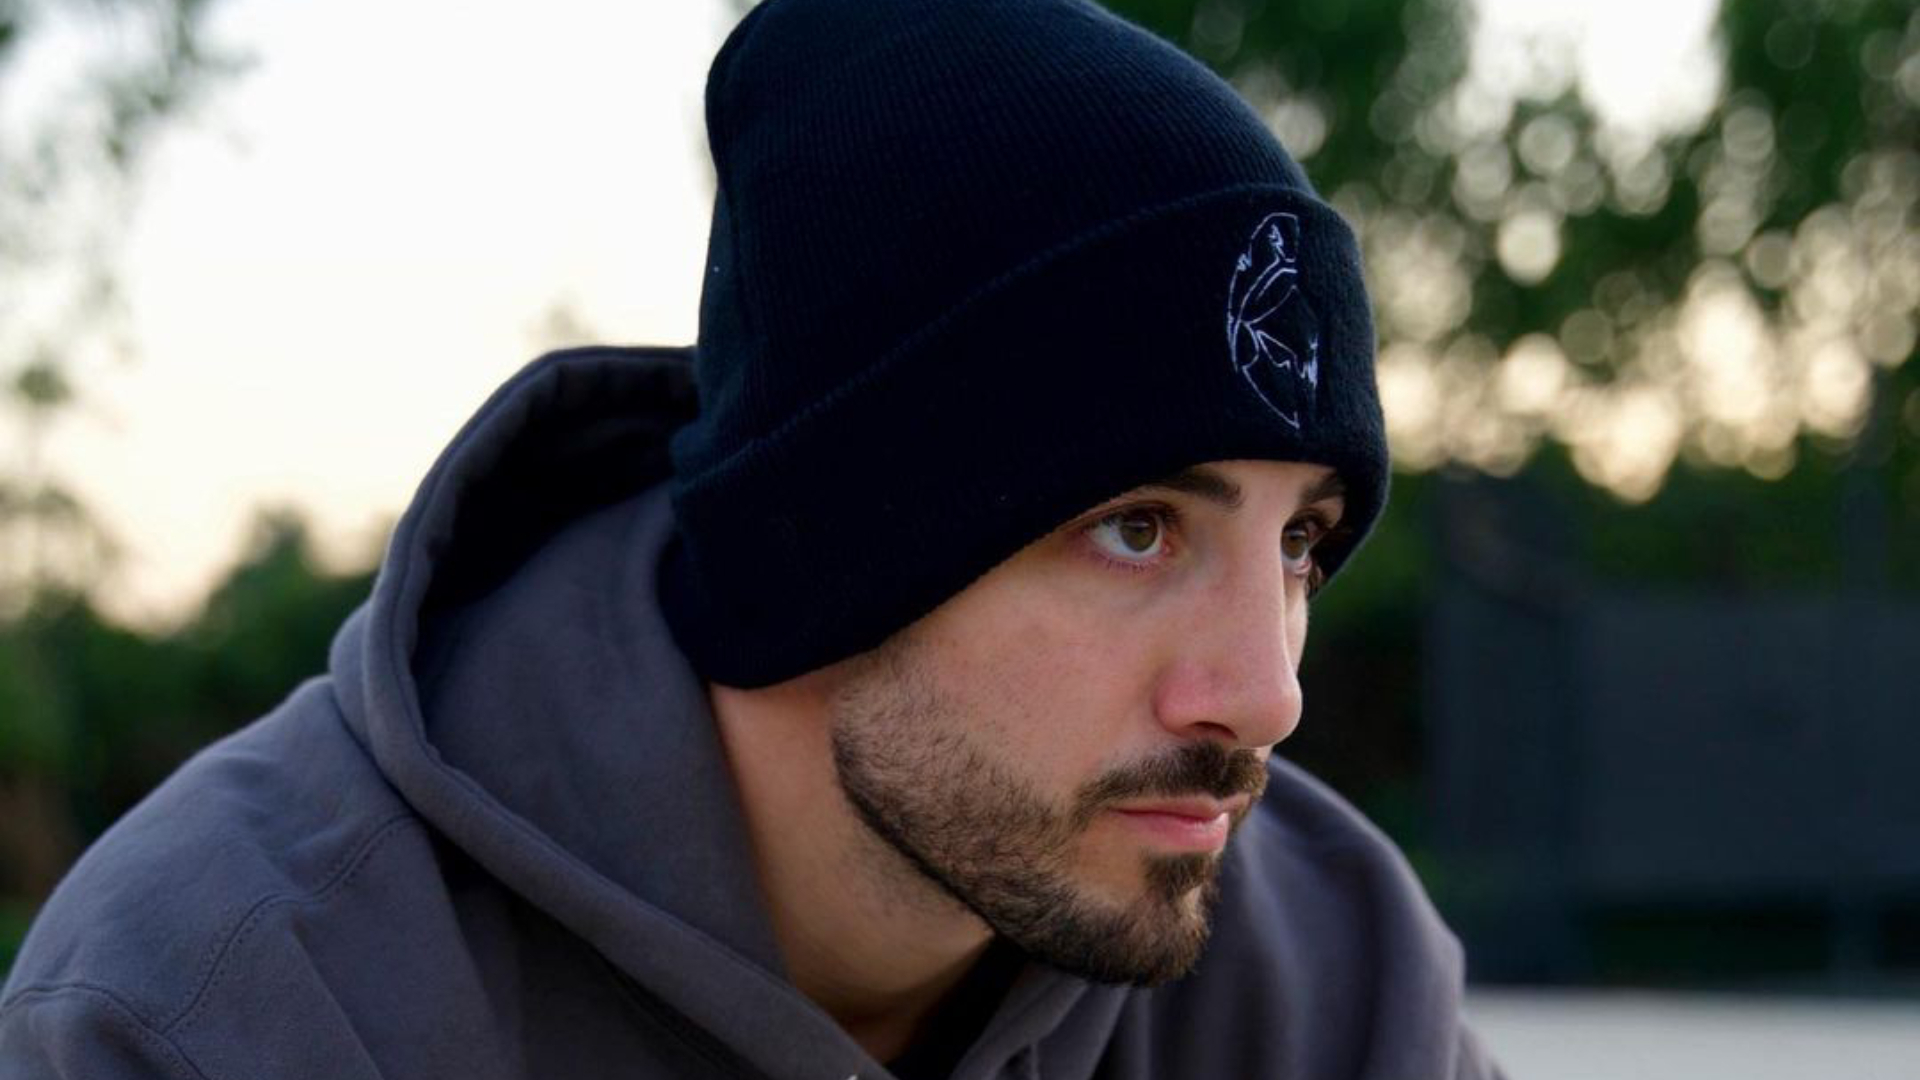 Twitch star NICKMERCS believes hackers in competitive games should go to jail.